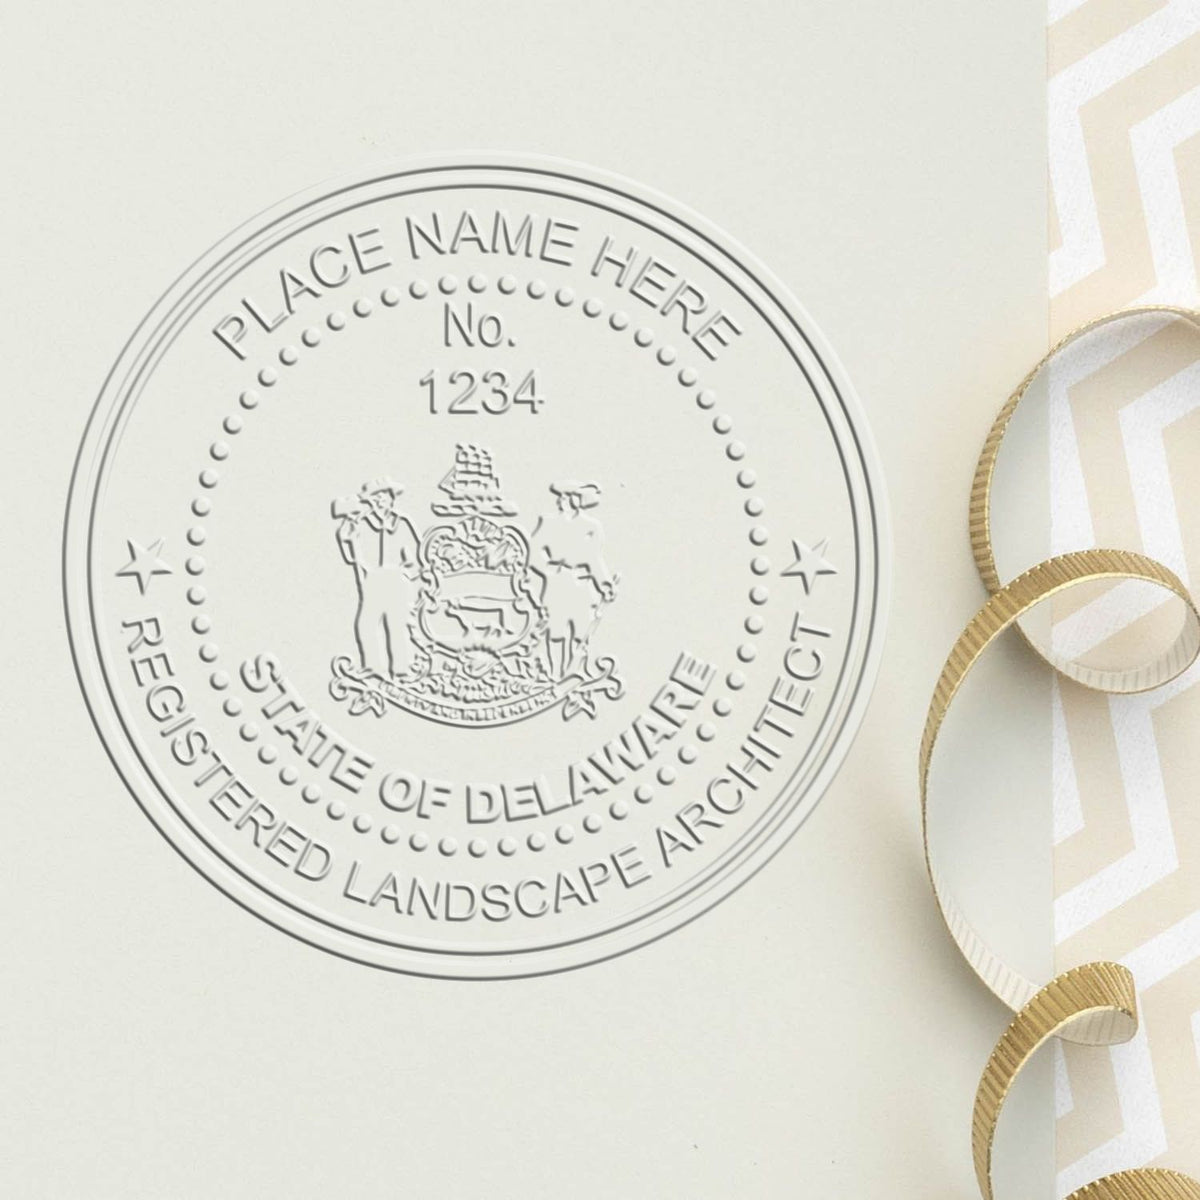 A stamped imprint of the Gift Delaware Landscape Architect Seal in this stylish lifestyle photo, setting the tone for a unique and personalized product.